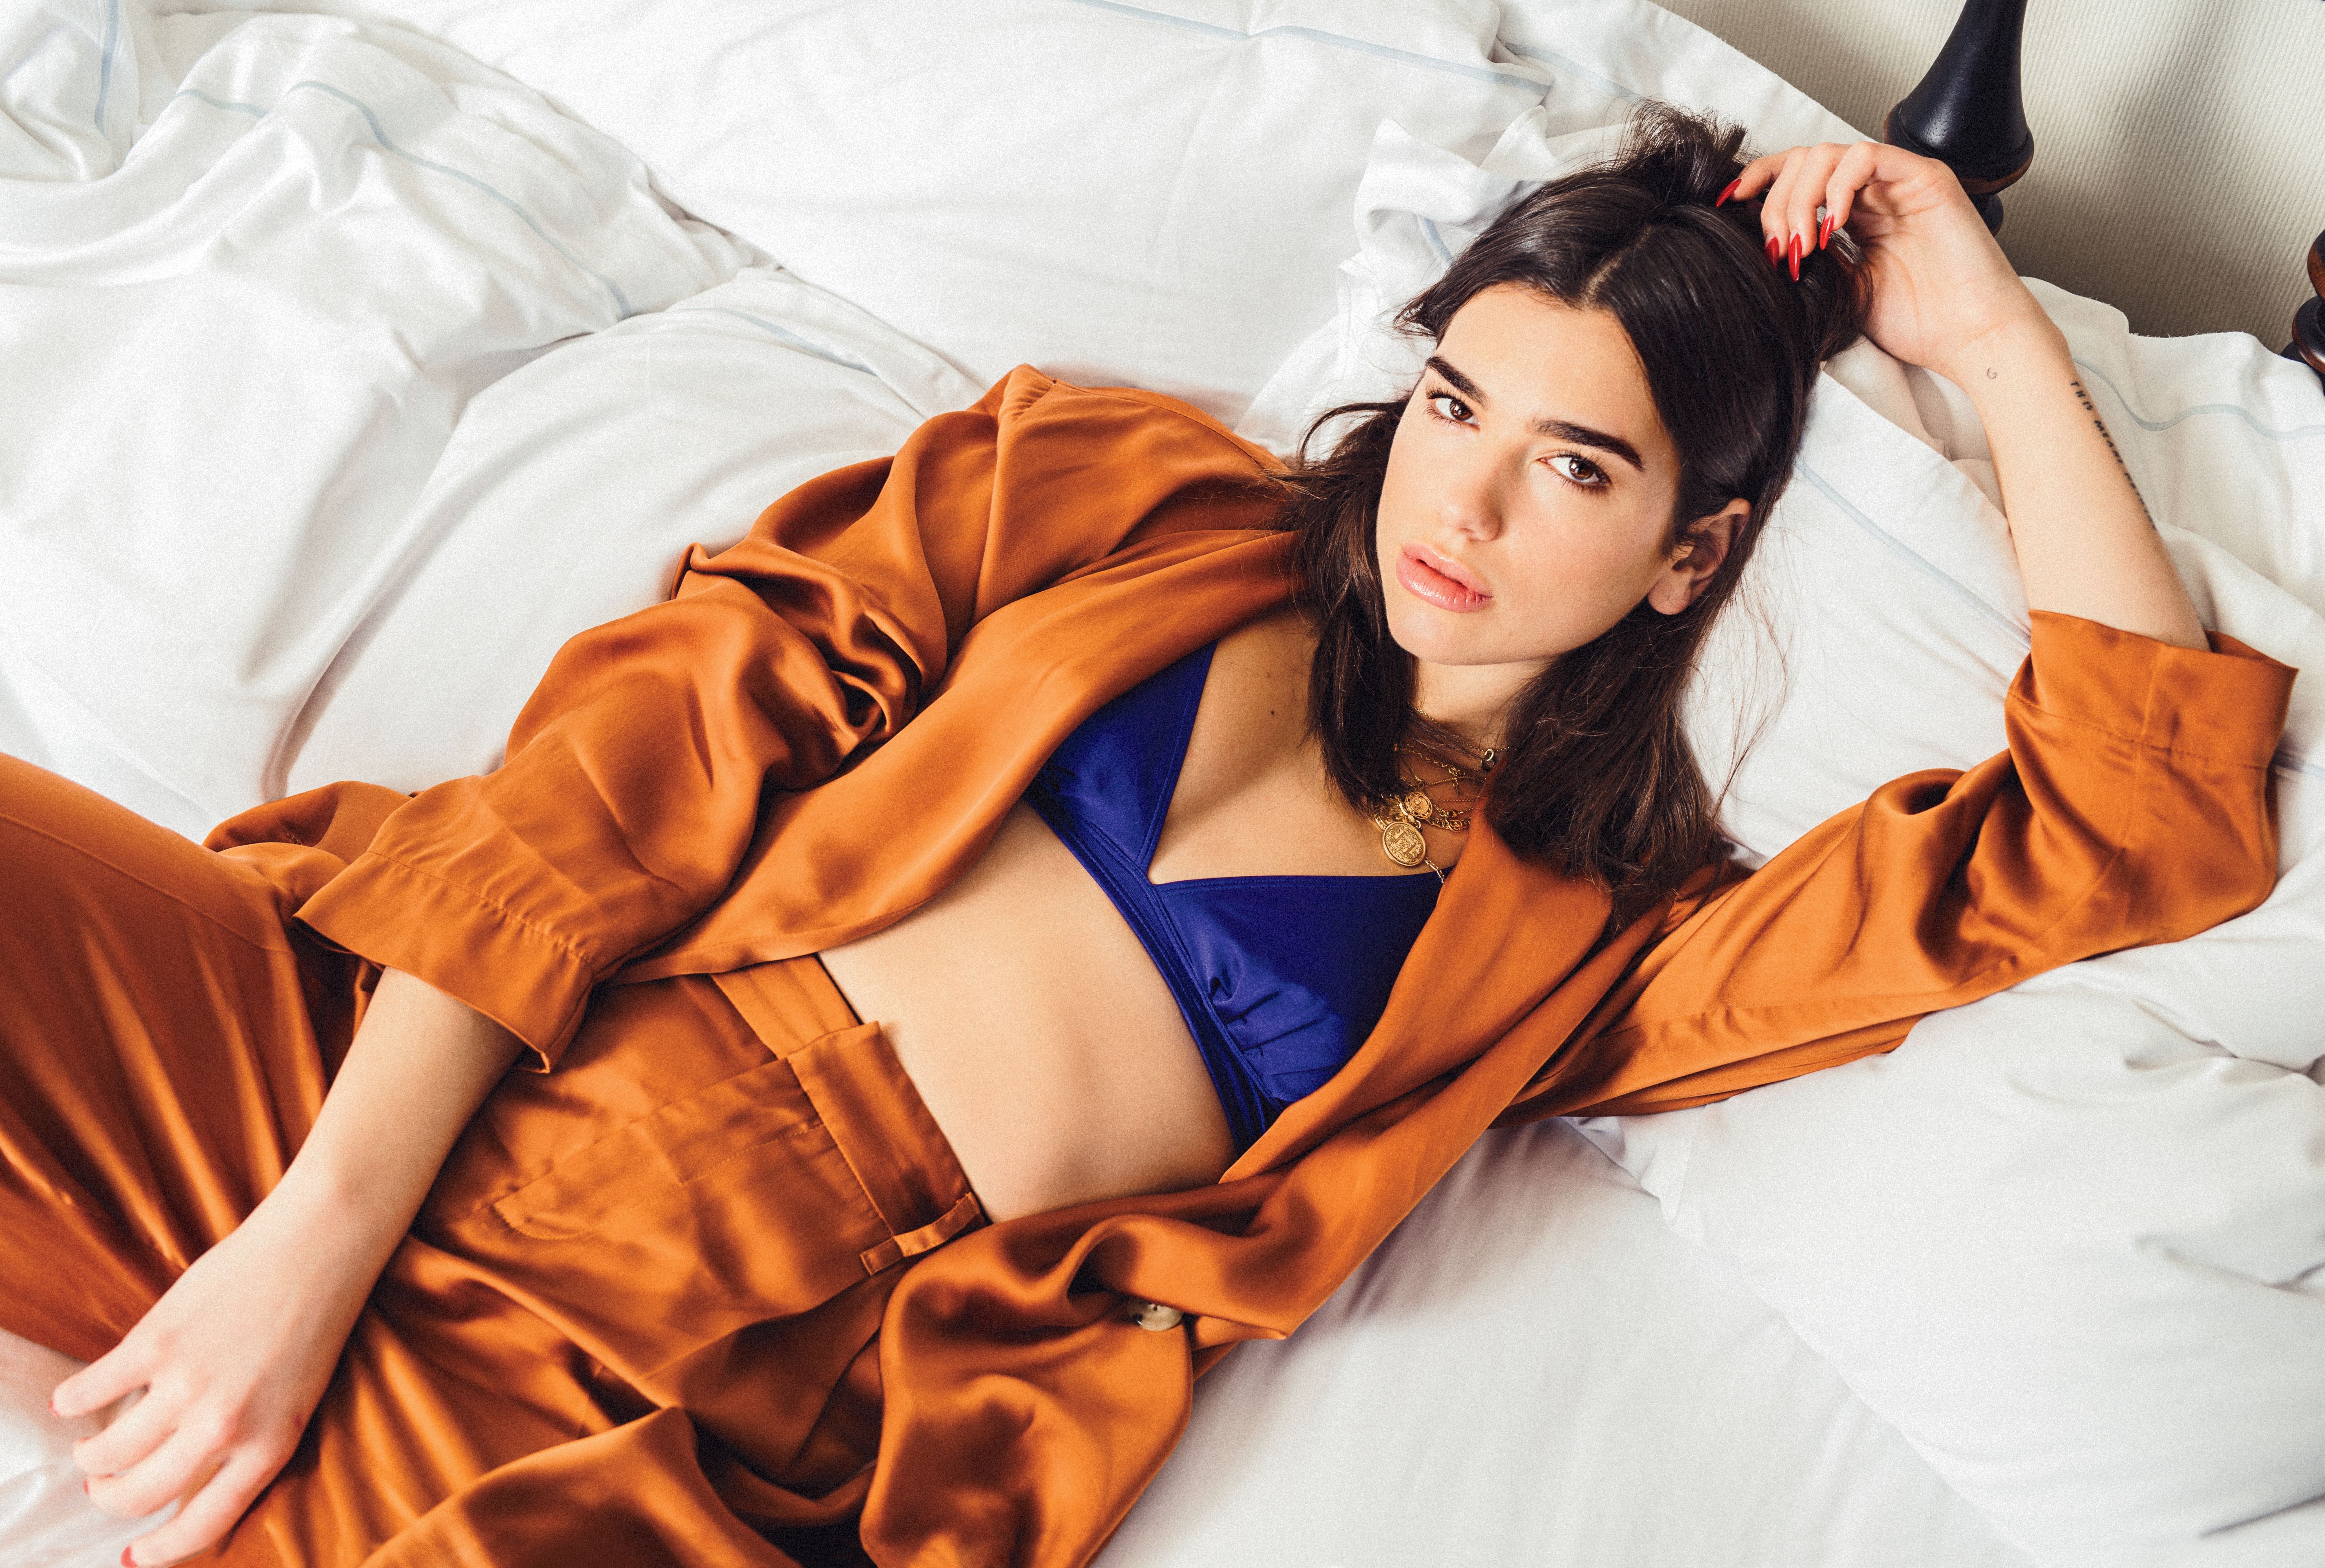 Dua Lipa Rolling Stone 2018 Hd Celebrities 4k Wallpapers Images Backgrounds Photos And Pictures 9884